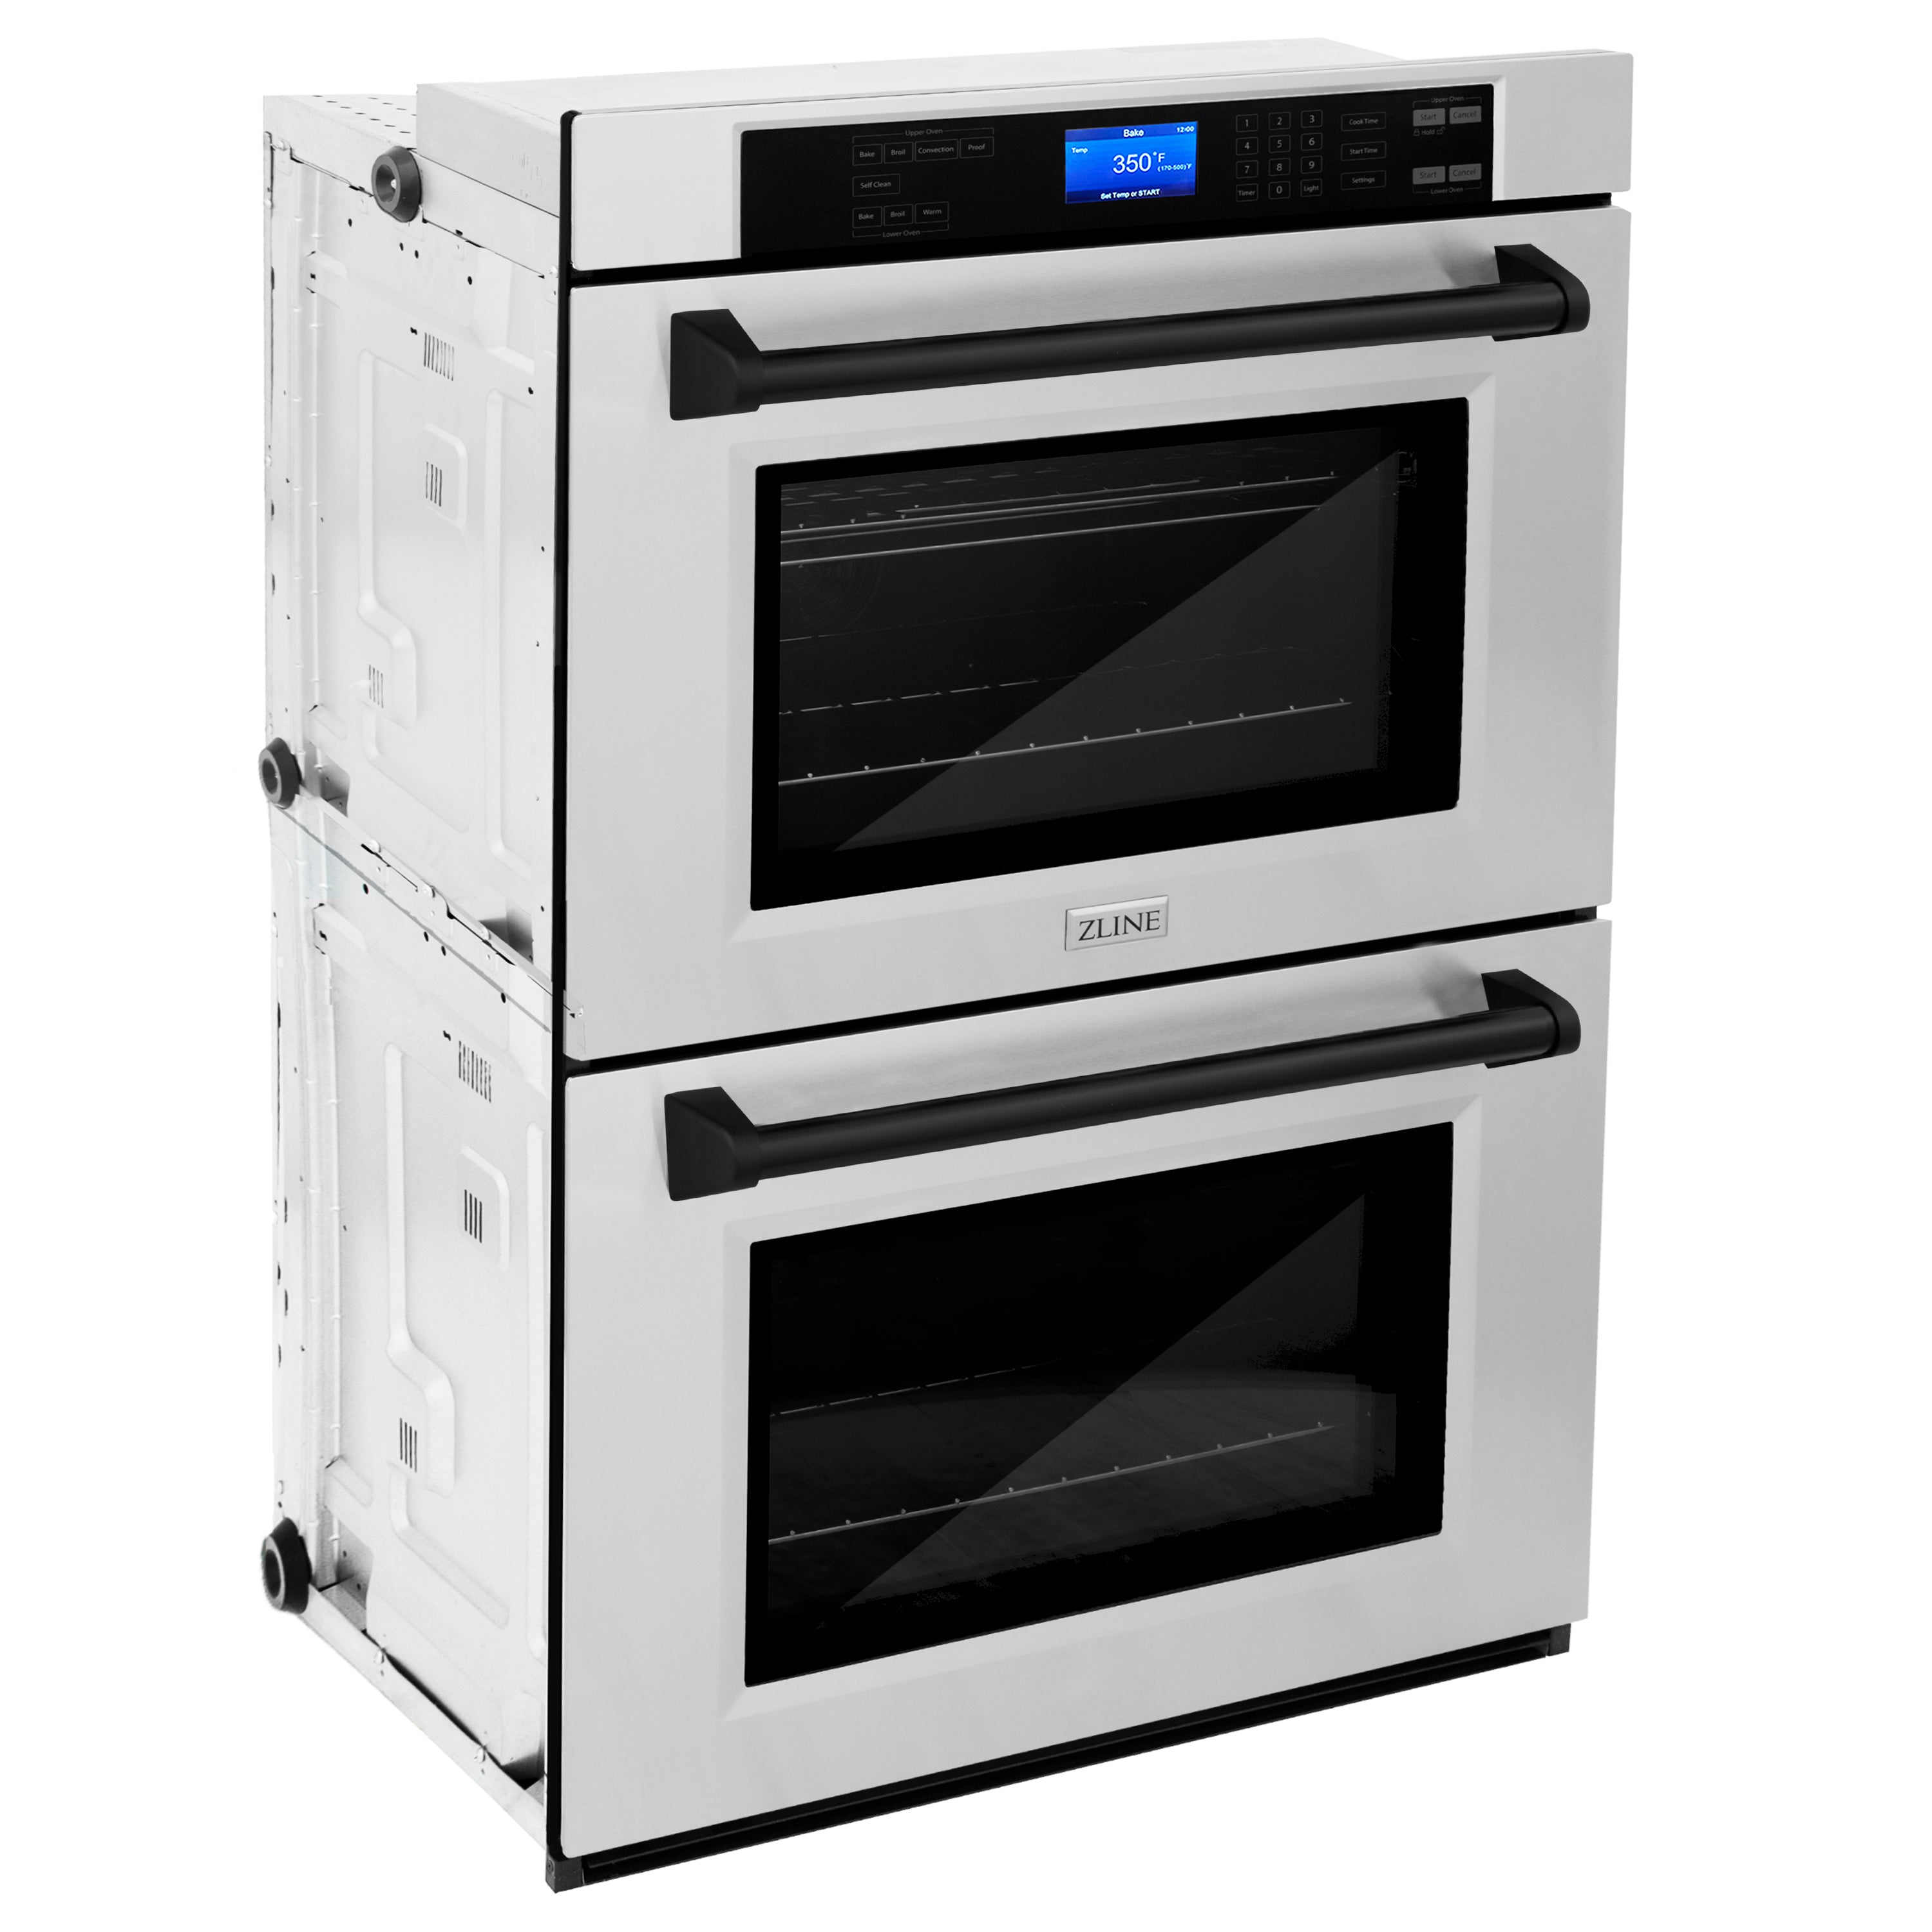 ZLINE 30" Autograph Edition Double Wall Oven with Self Clean and True Convection in Stainless Steel and Matte Black (AWDZ-30-MB)